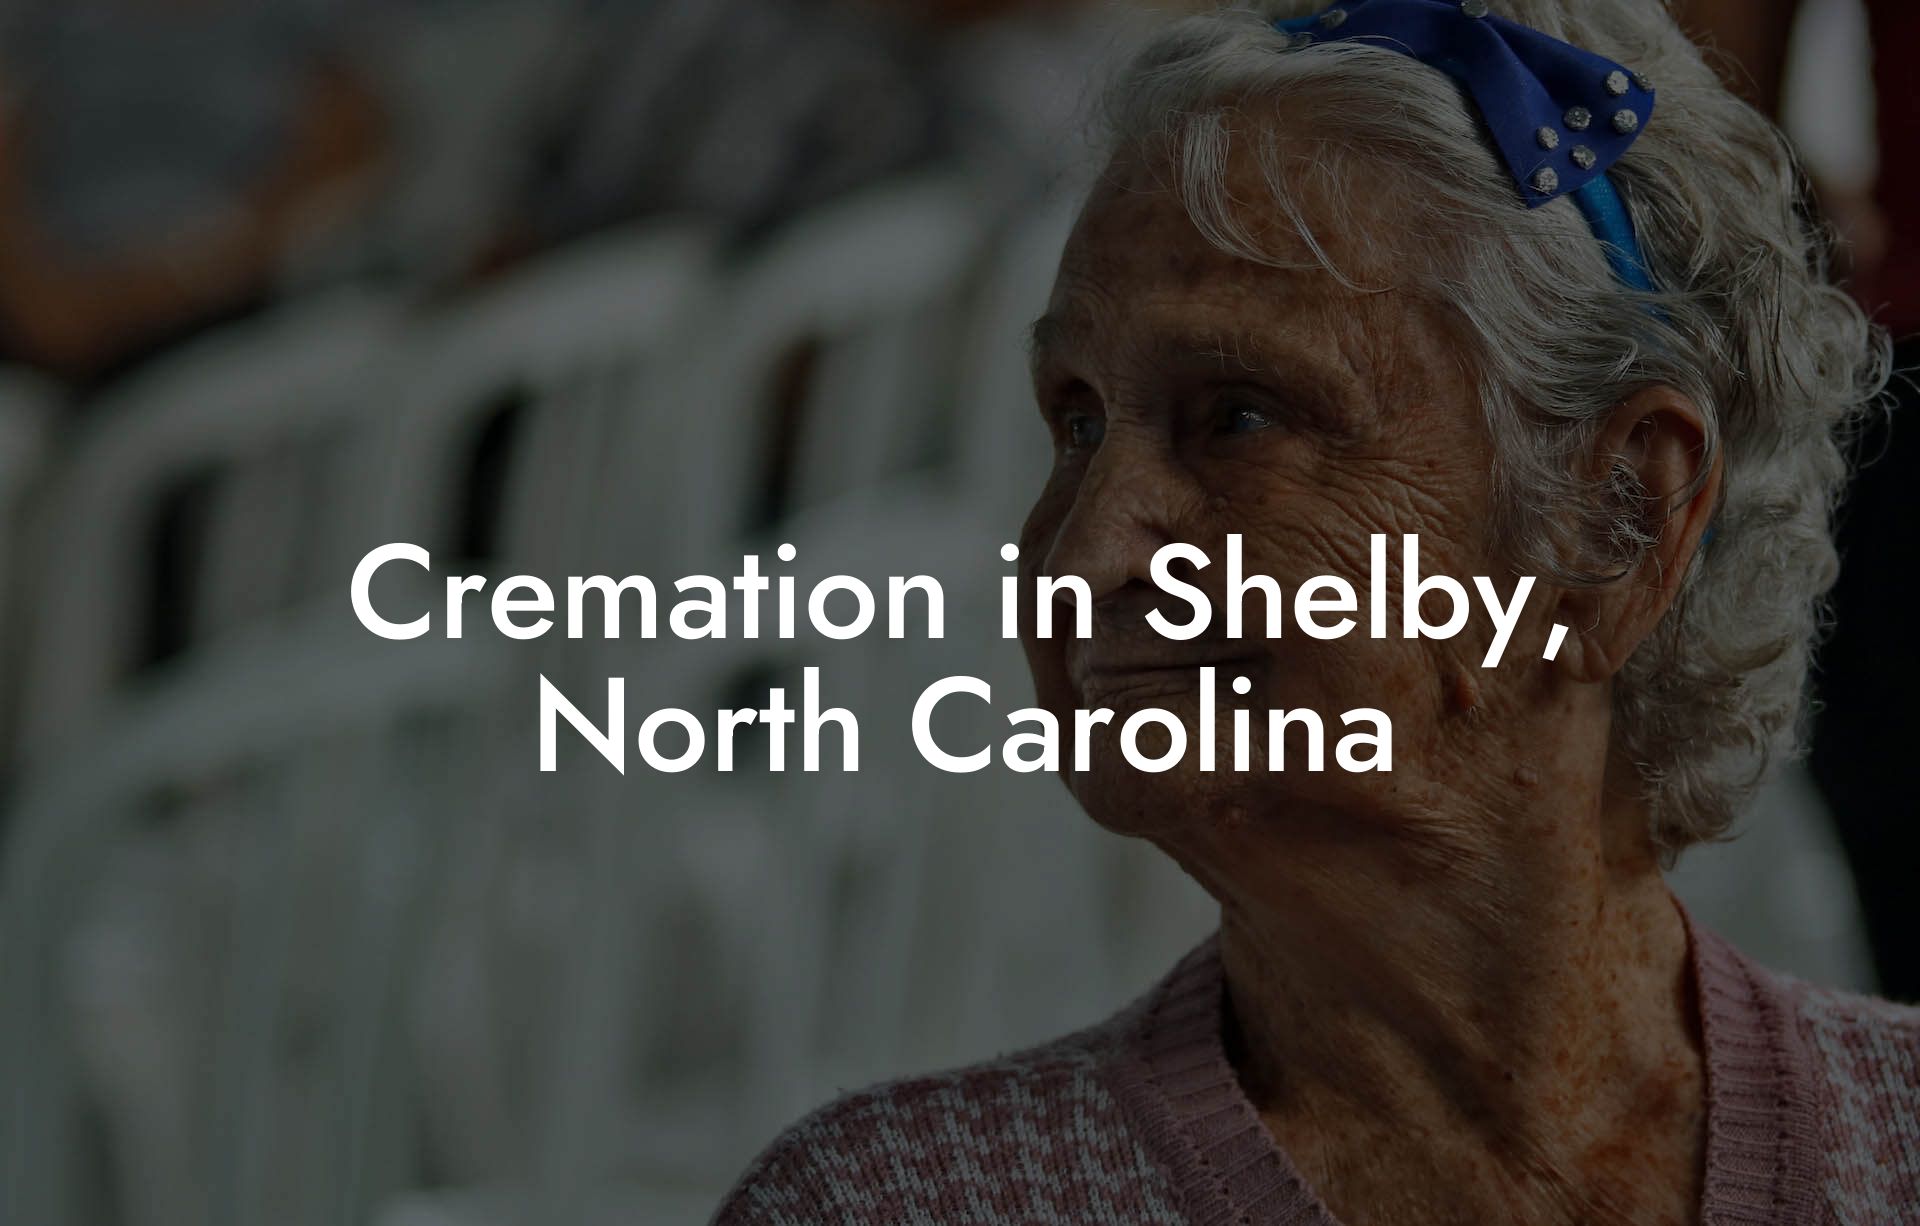 Cremation in Shelby, North Carolina